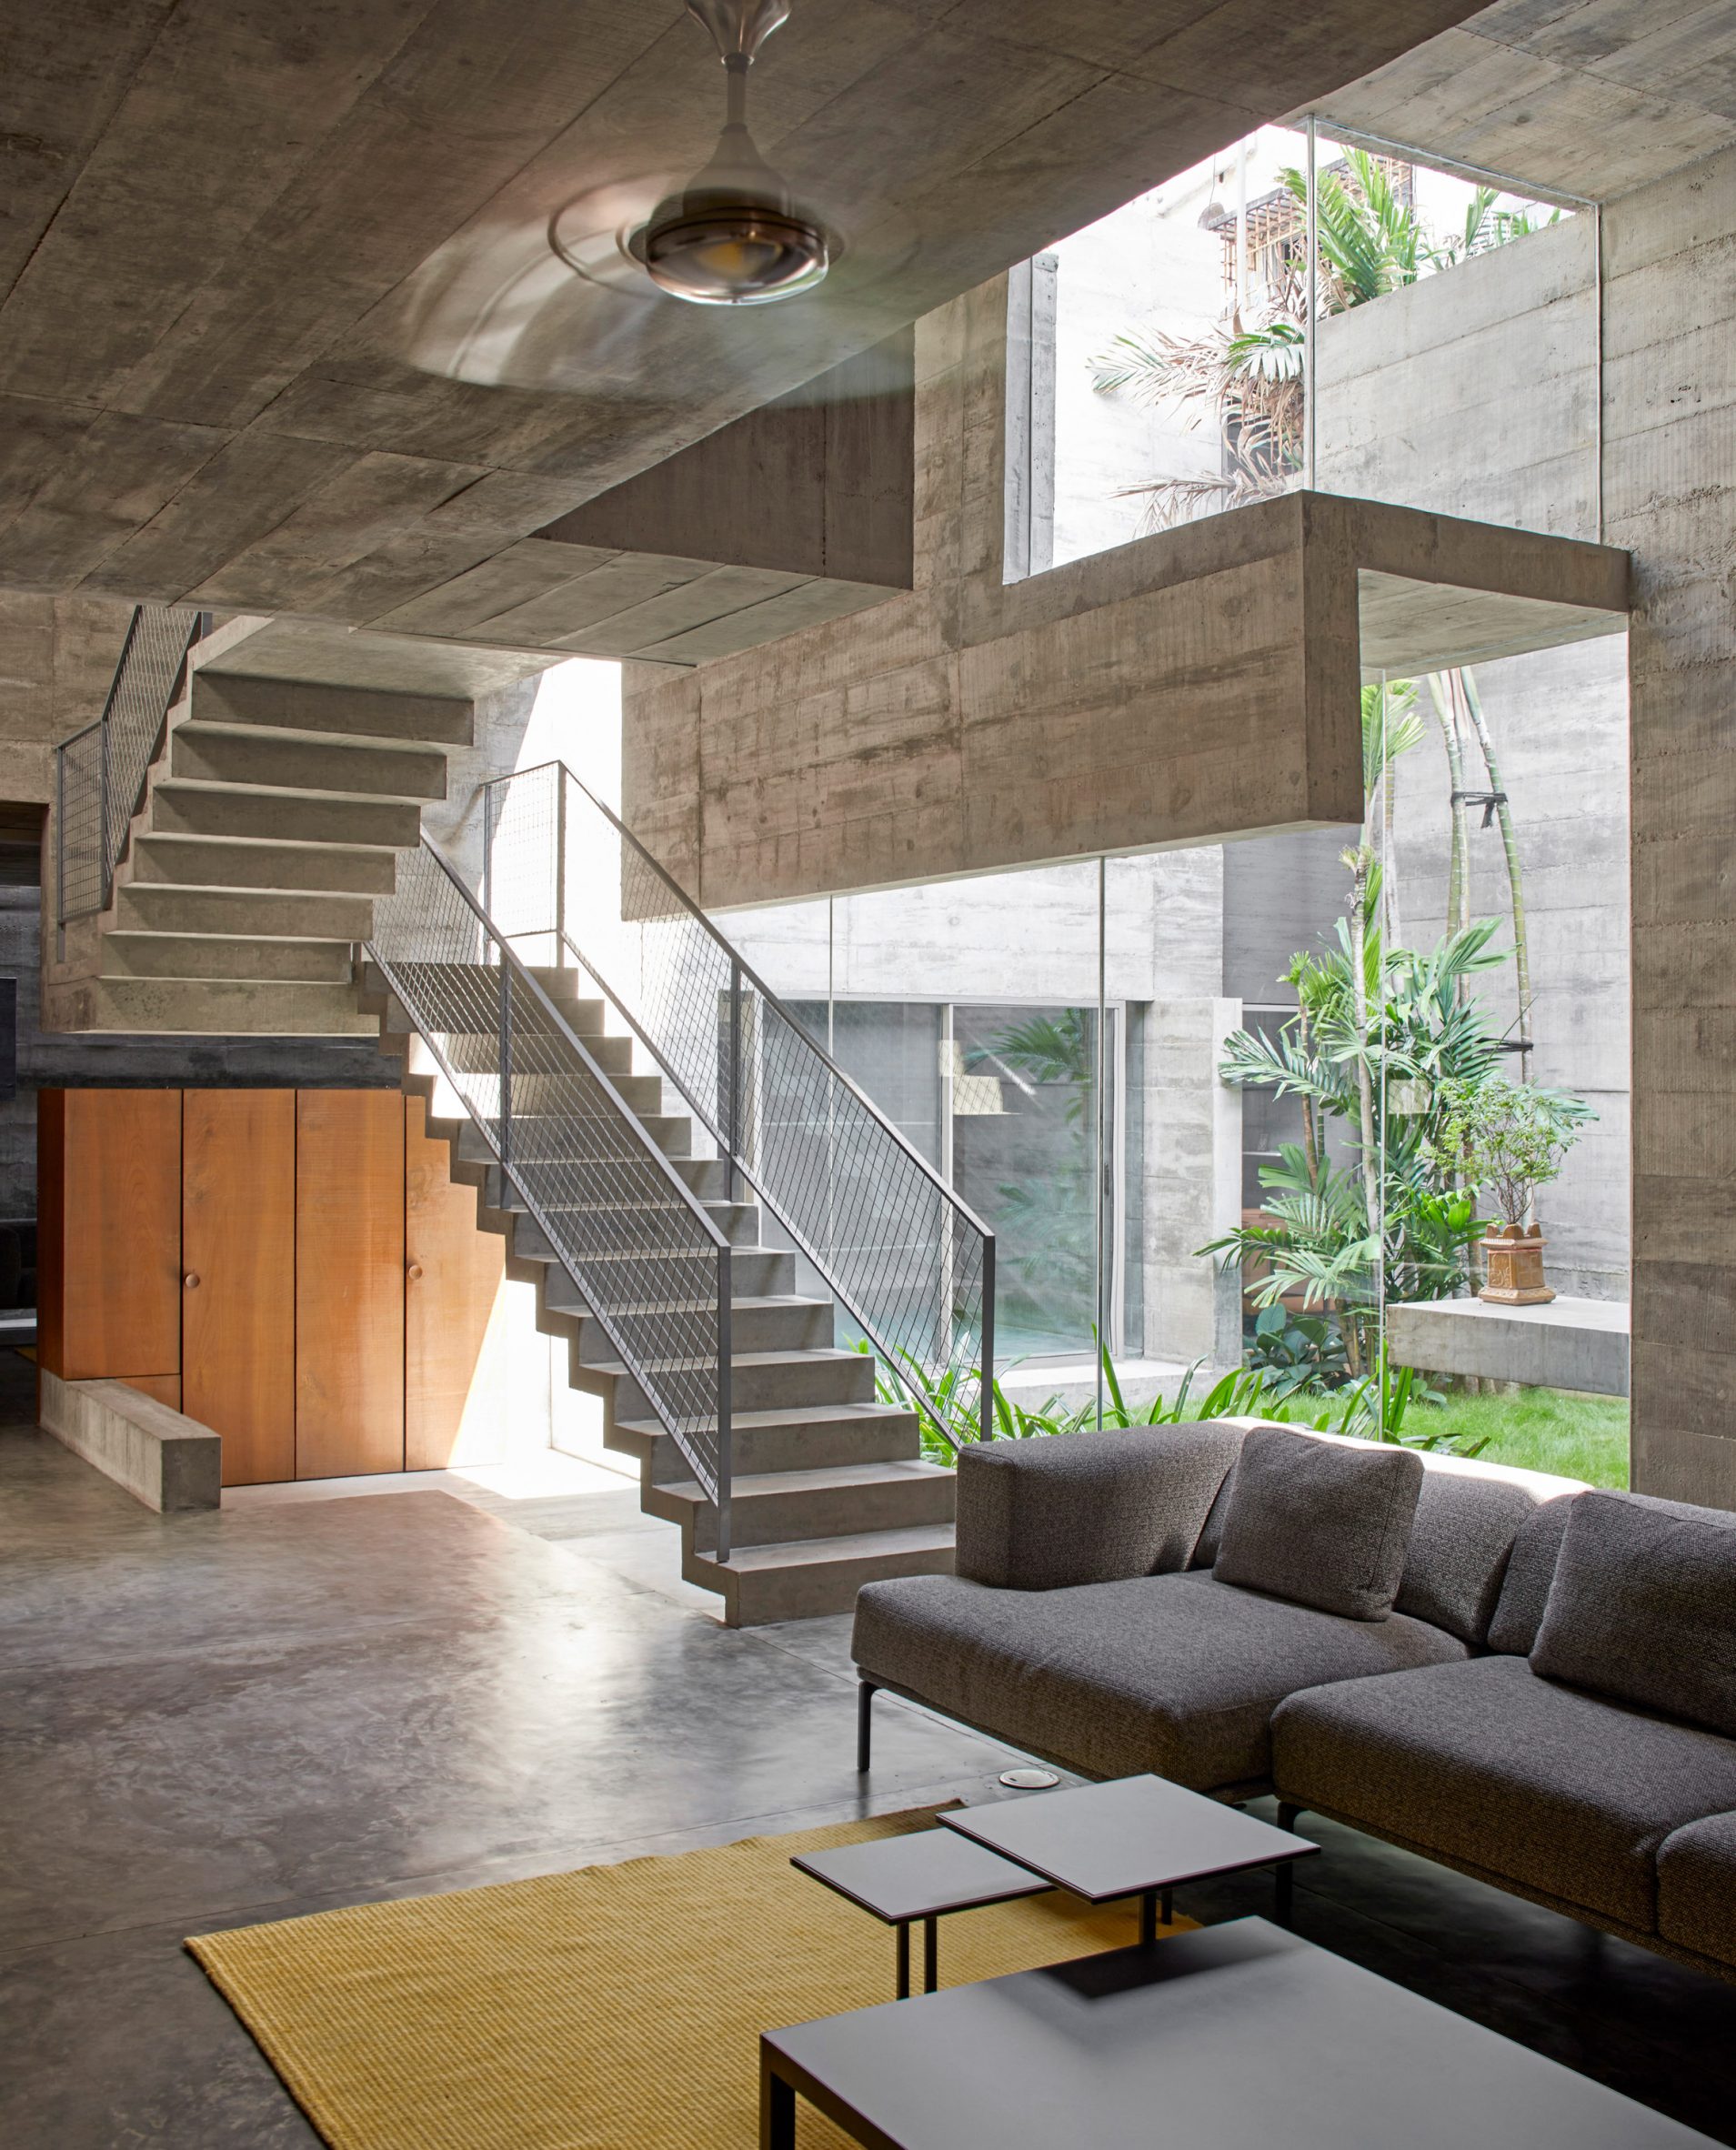 Interior of concrete house in India by Matharoo Associates